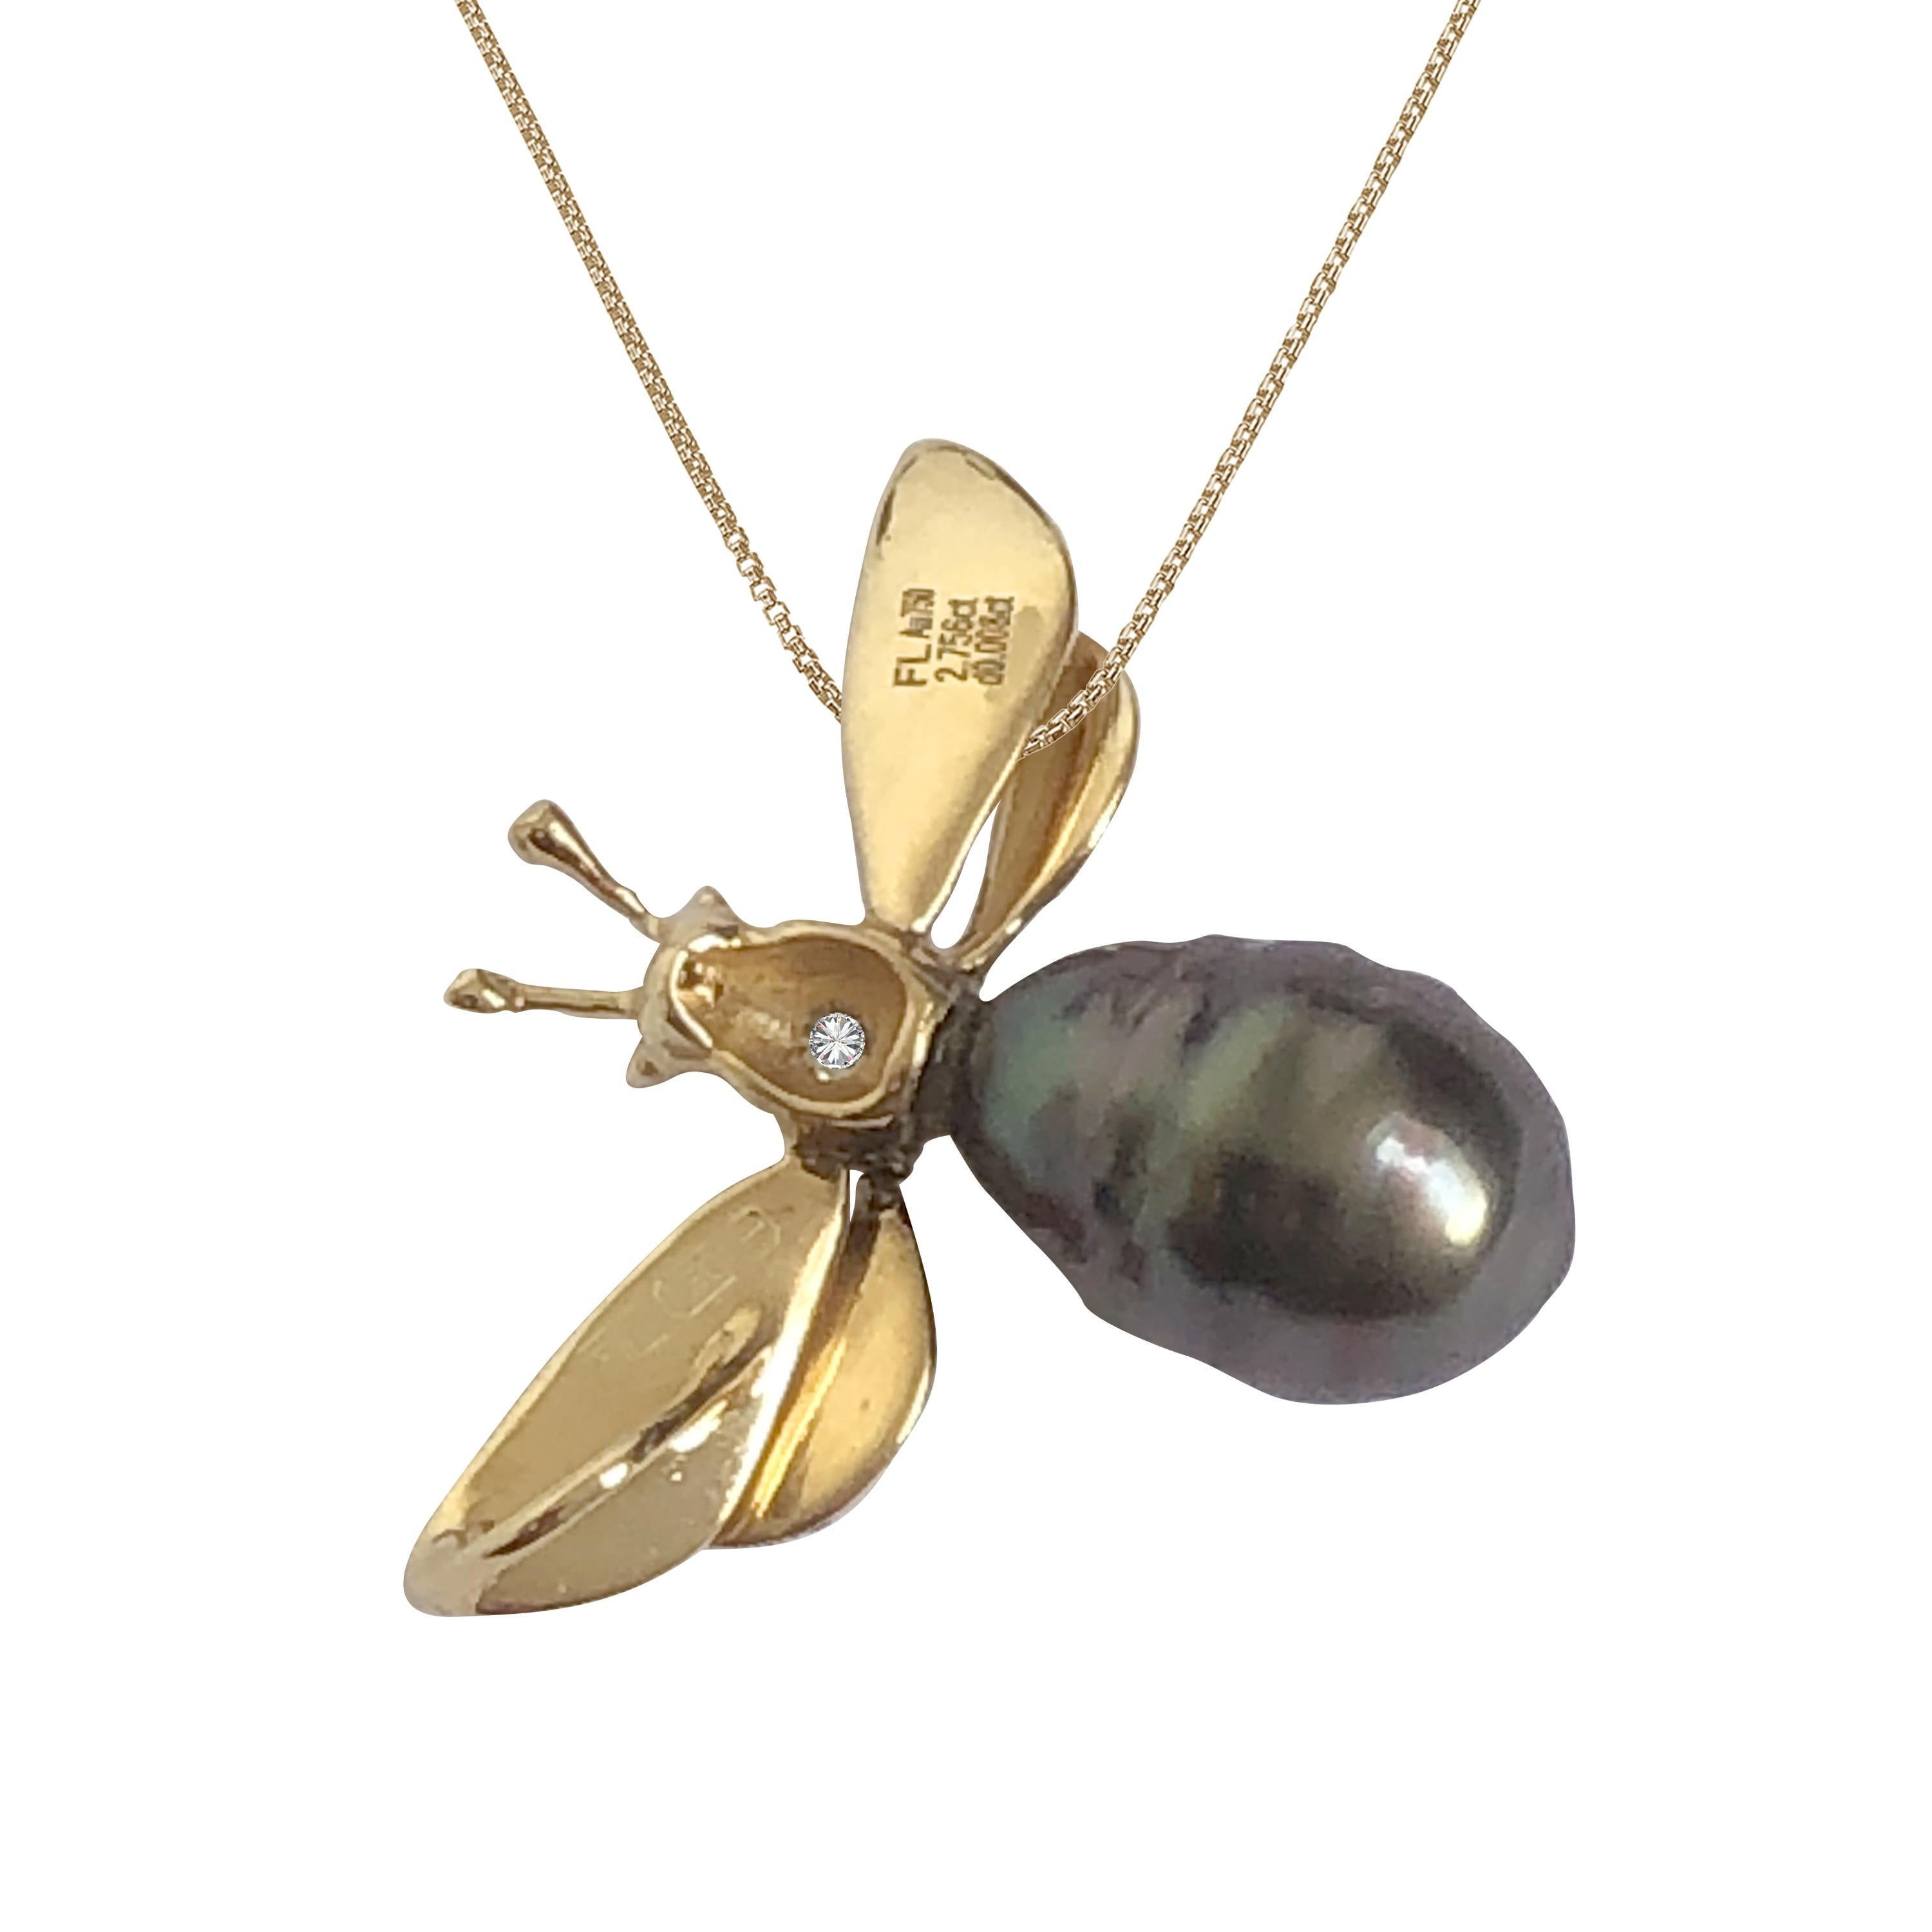 Description:
Bee pendant in 18ct yellow gold, glistening with an 0.008ct diamond and lustrous 8mm x 6mm black pearl. Chain length is 16 inches.

Specification:
Size (LxW): 20mm x 17mm
Weight: 2.8gm
Stones: diamond = 0.008ct, black pearl = 8mm x